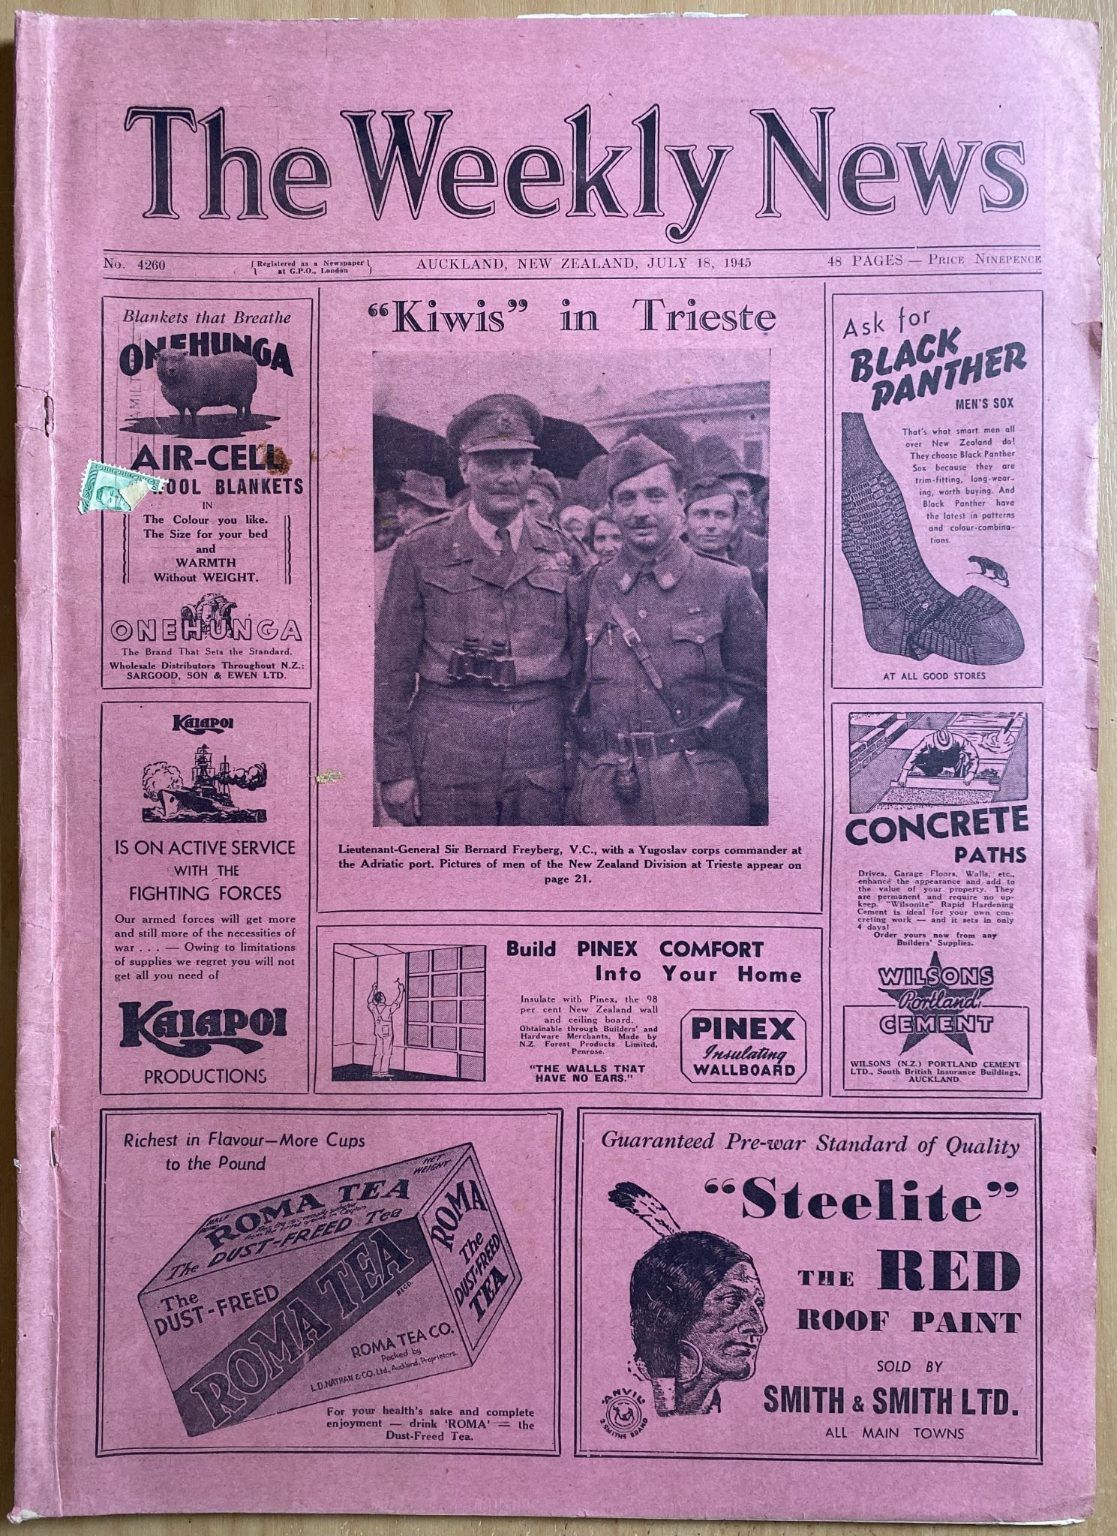 OLD NEWSPAPER: The Weekly News - No. 4260, 18 July 1945